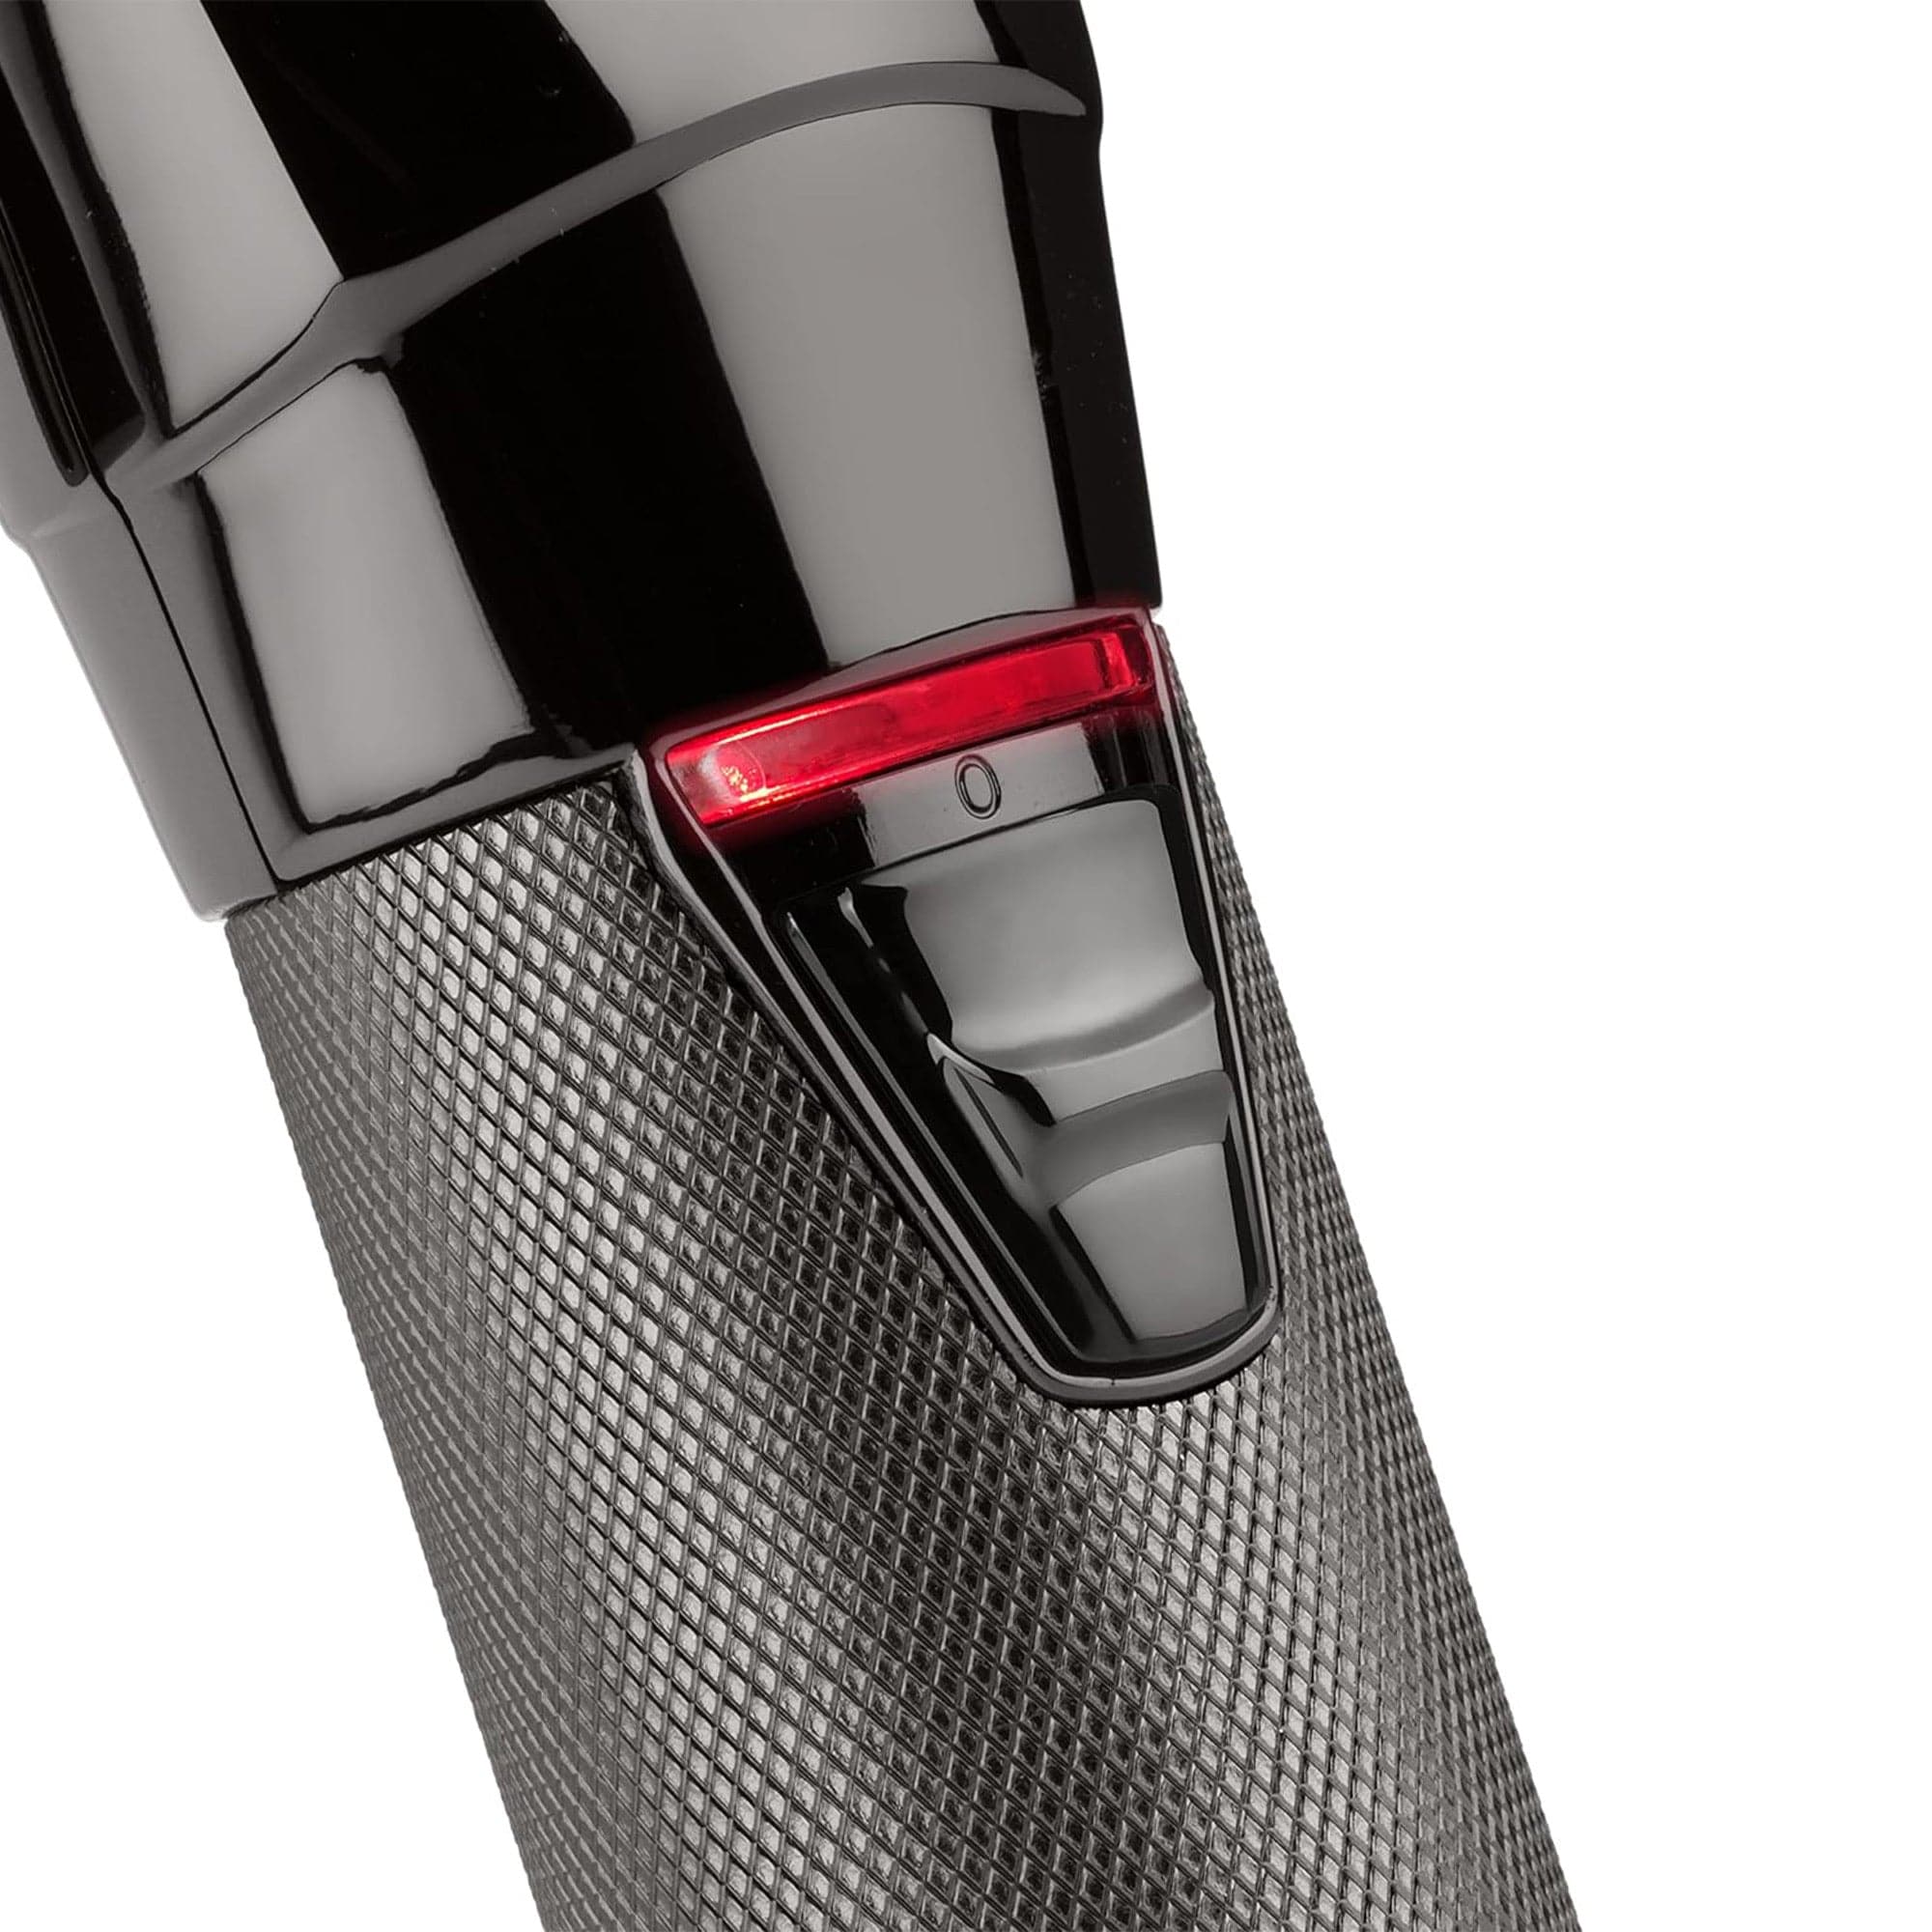 Babyliss Pro - Clipper & Trimmer Cordless Super Motor Collection - Eson Direct